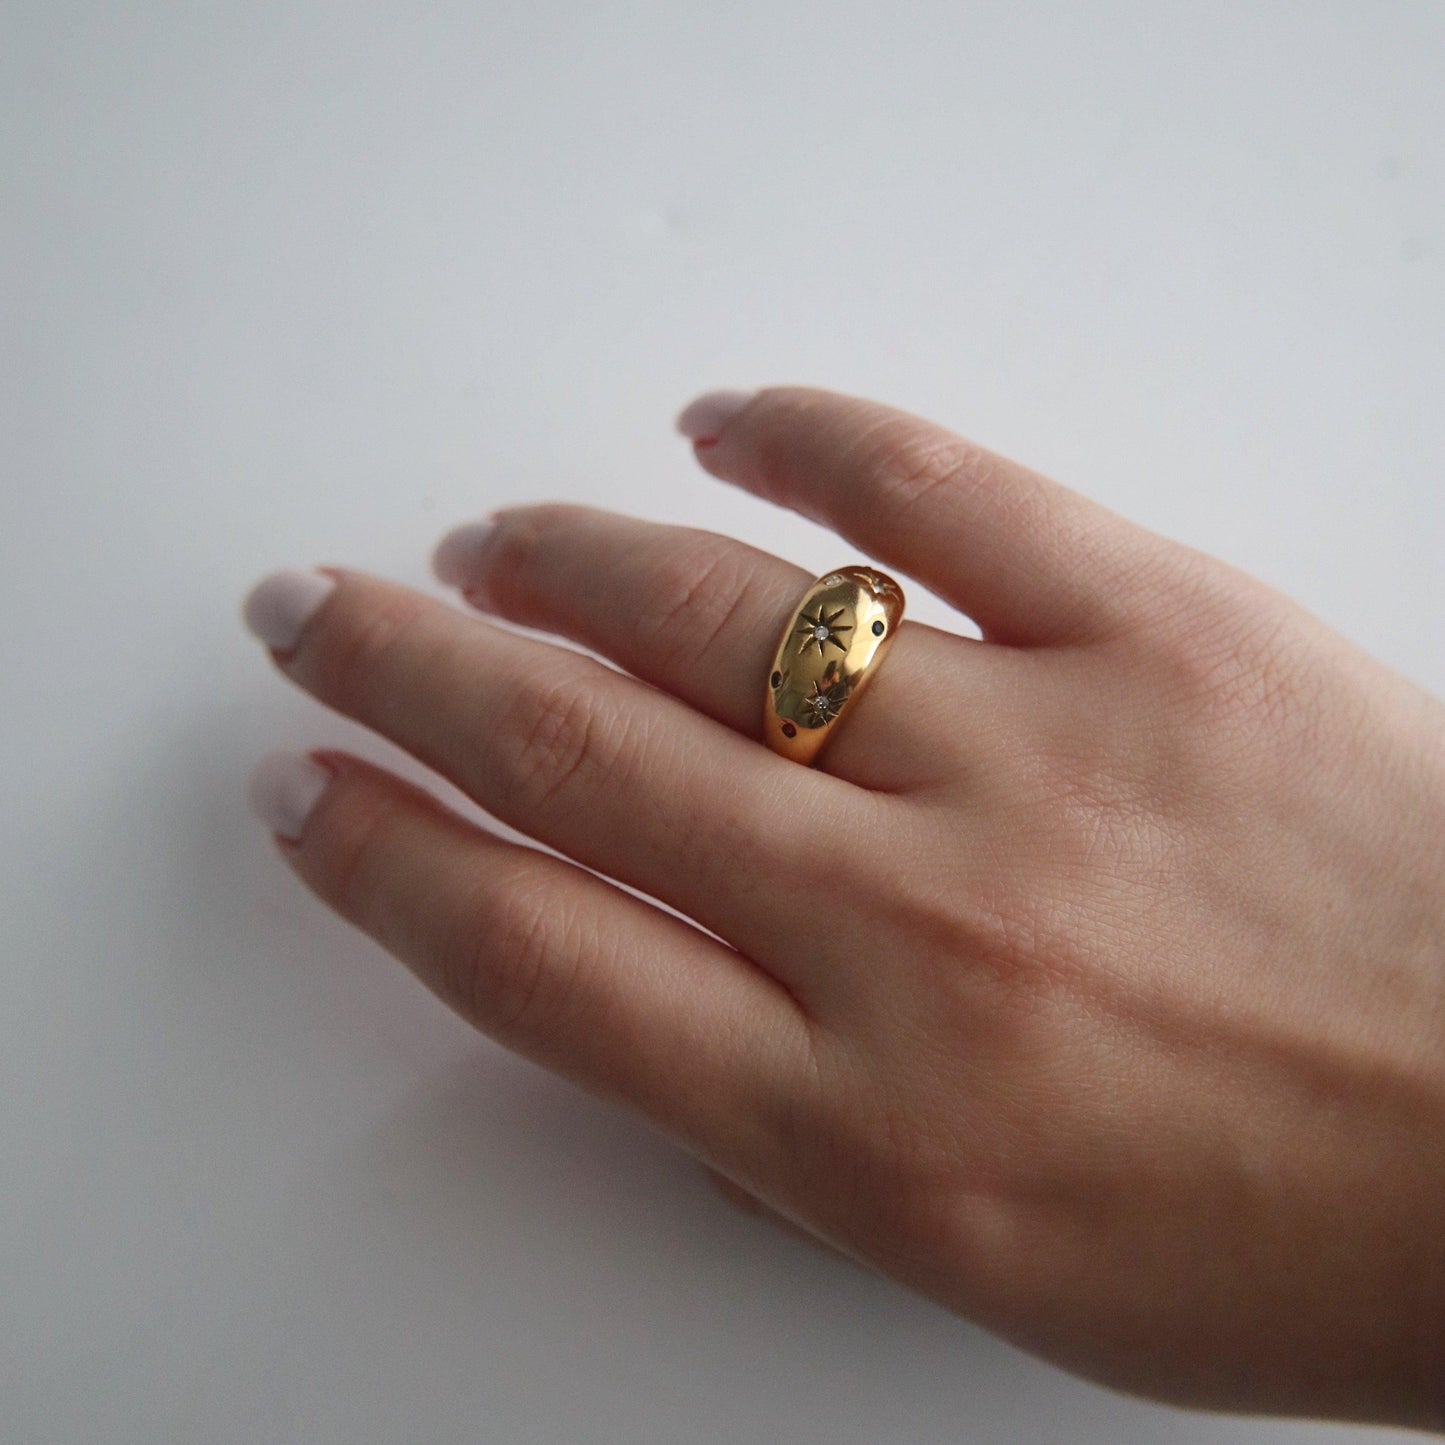 Star Dome Ring - JESSA JEWELRY | GOLD JEWELRY; dainty, affordable gold everyday jewelry. Tarnish free, water-resistant, hypoallergenic. Jewelry for everyday wear